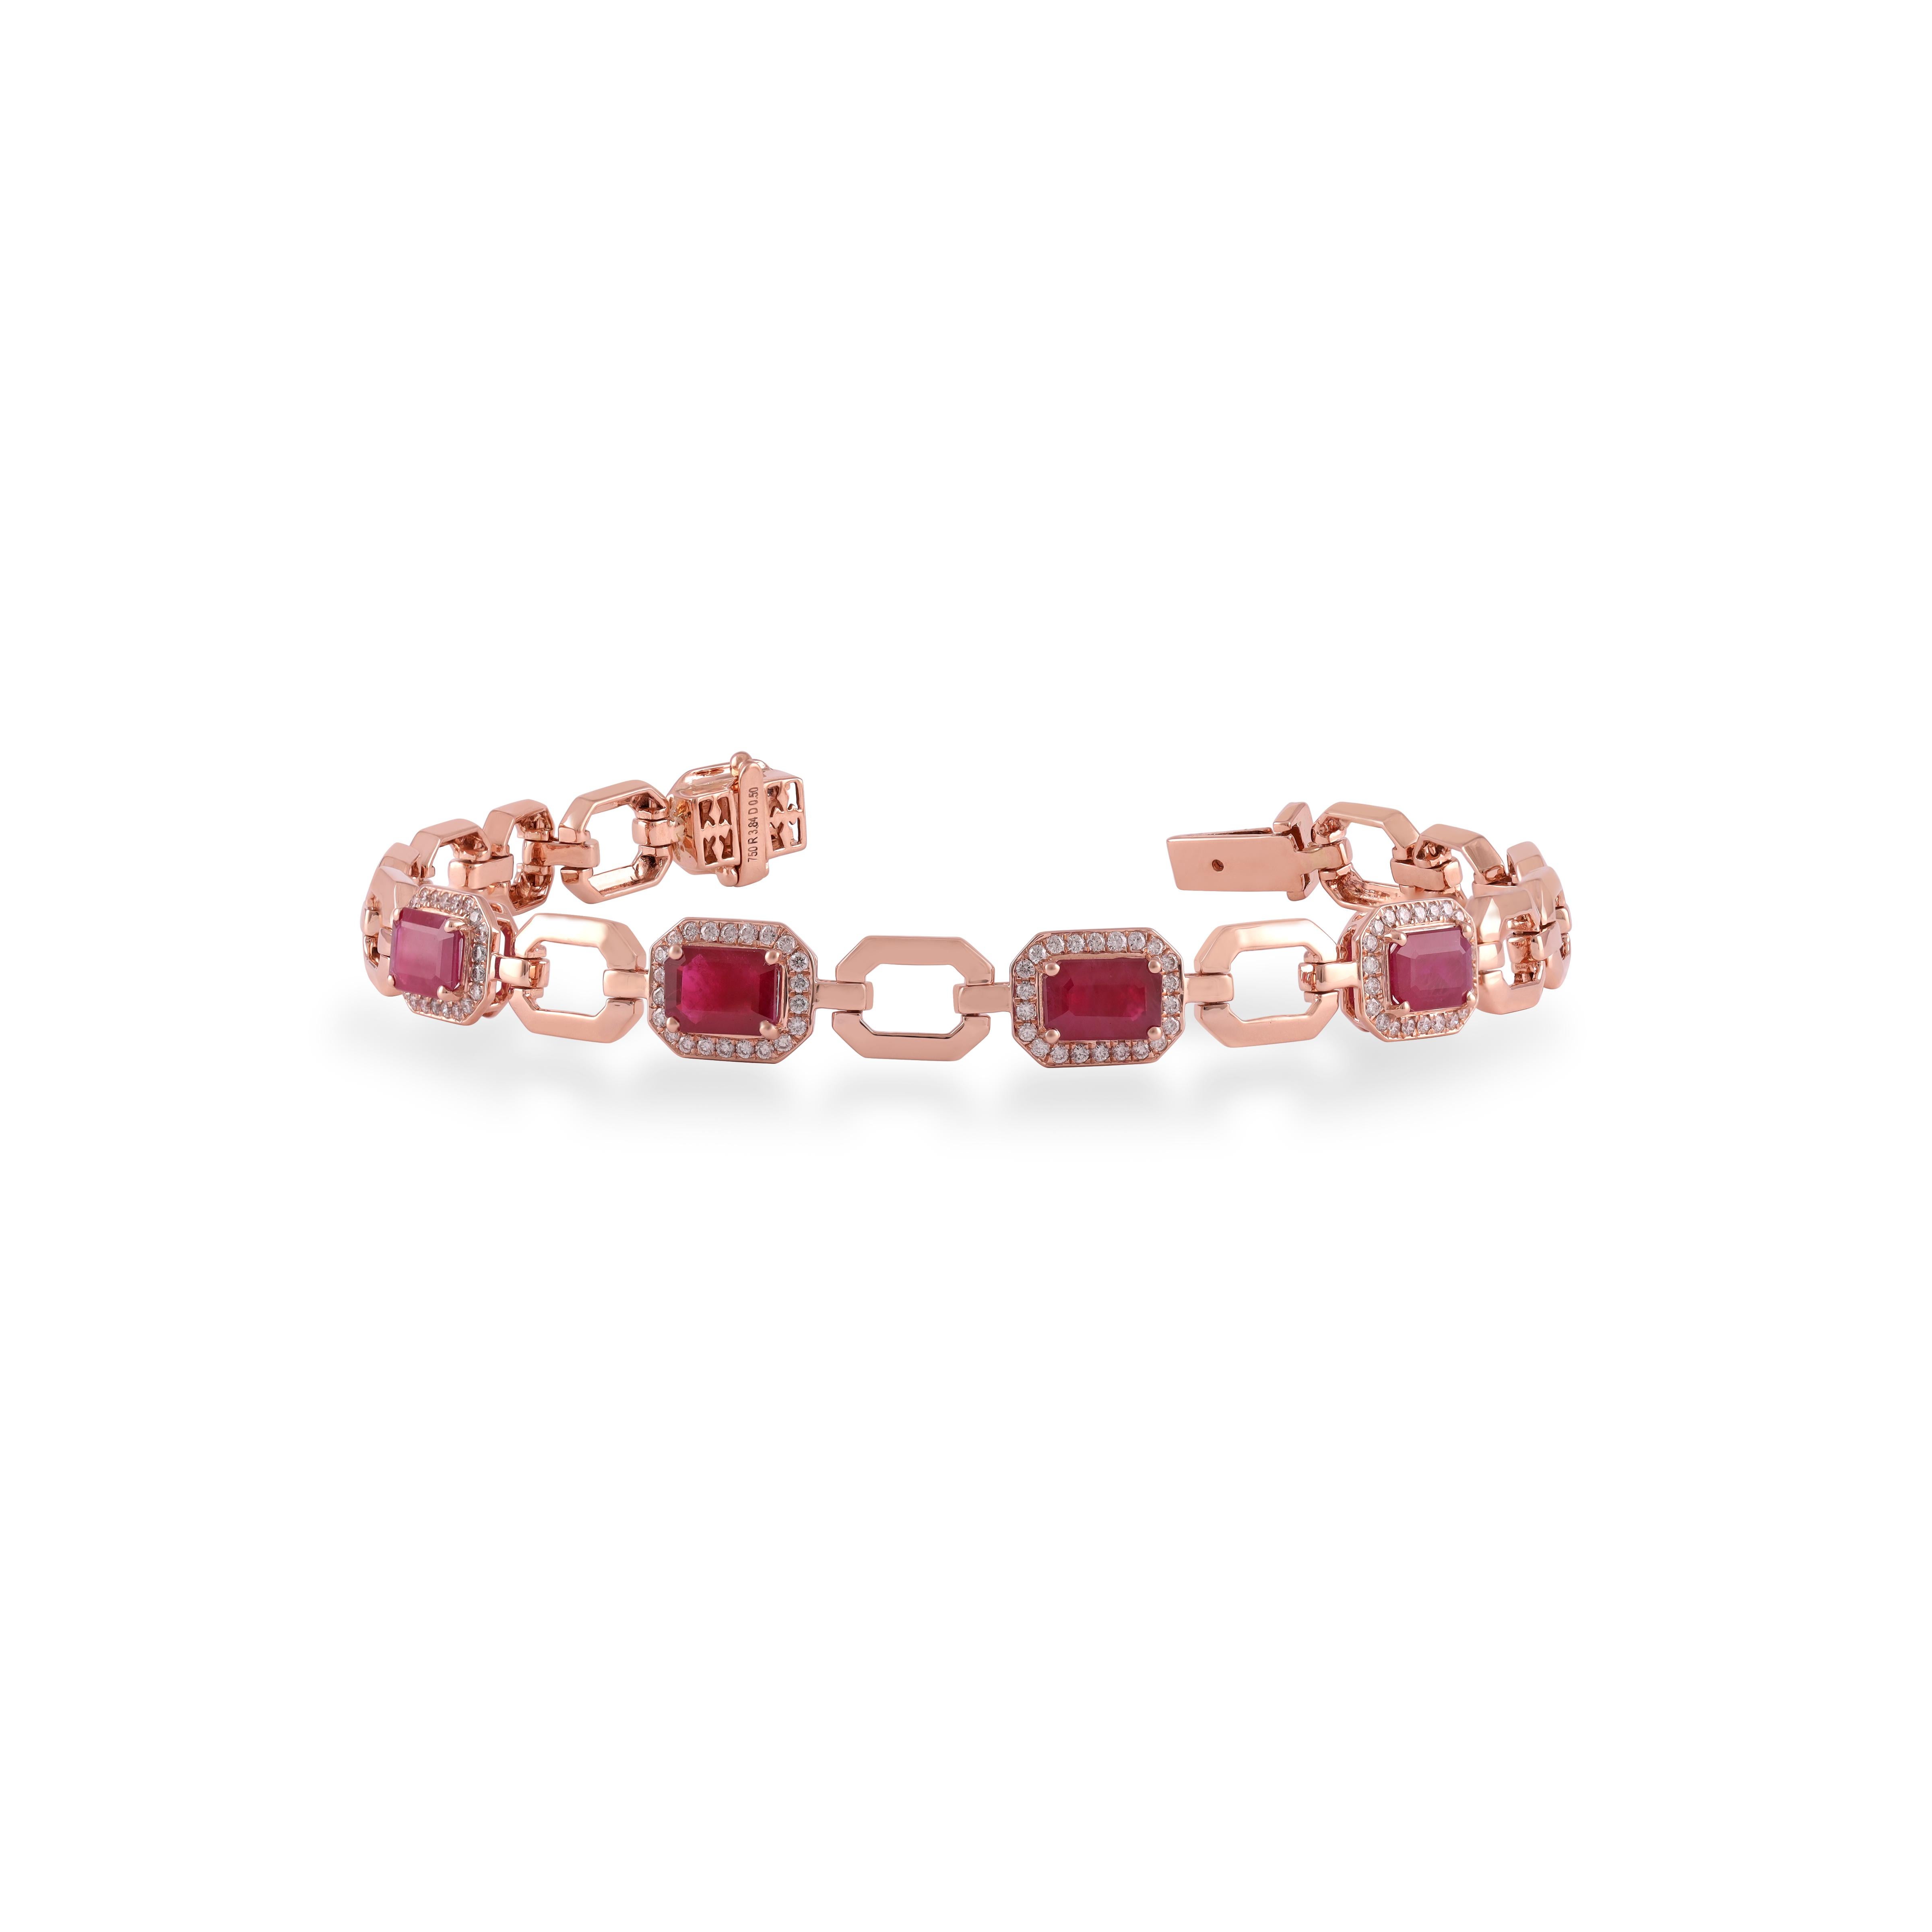 Contemporary 3.84 Carat Ruby and Diamond bracelet in 18k Rose Gold